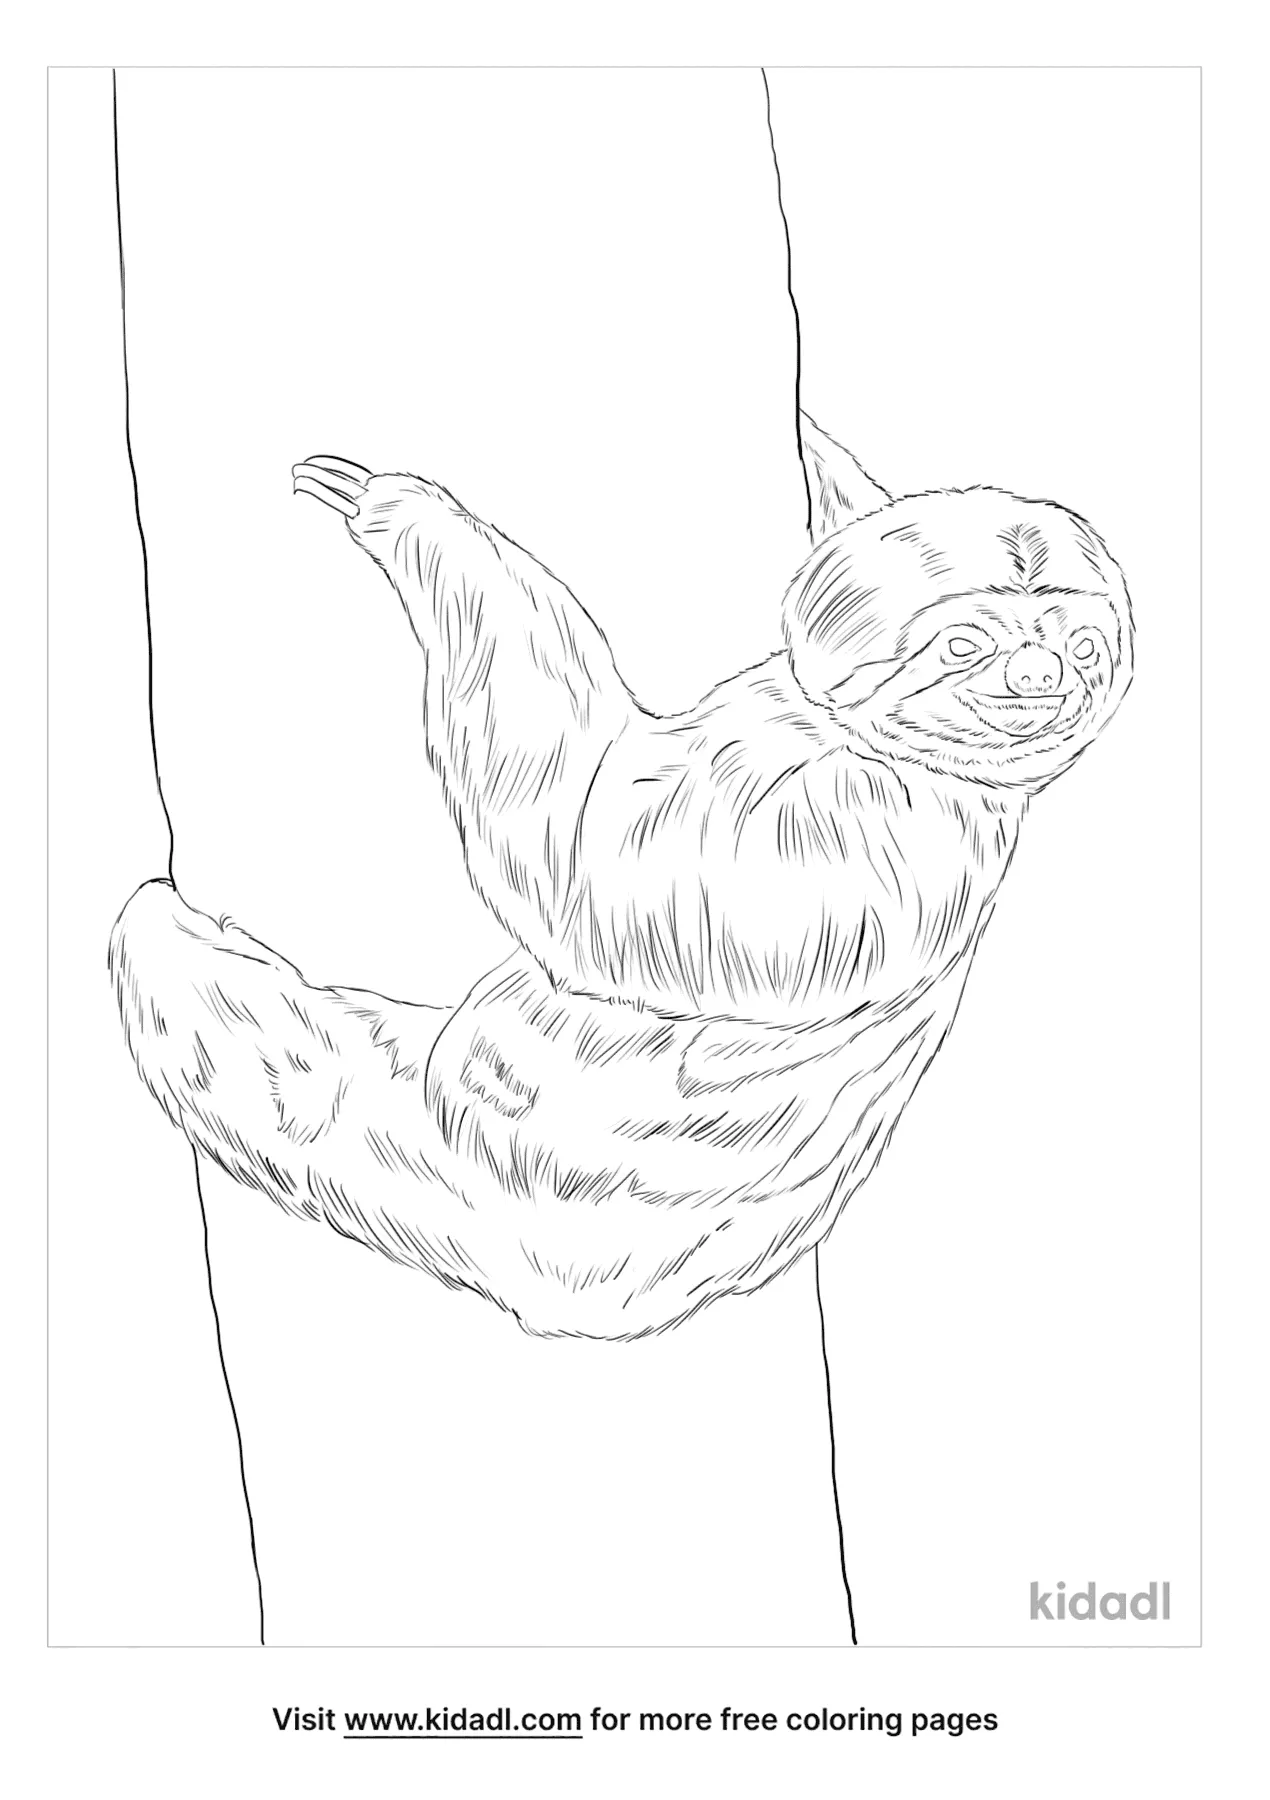 Three Toed Sloth Coloring Page